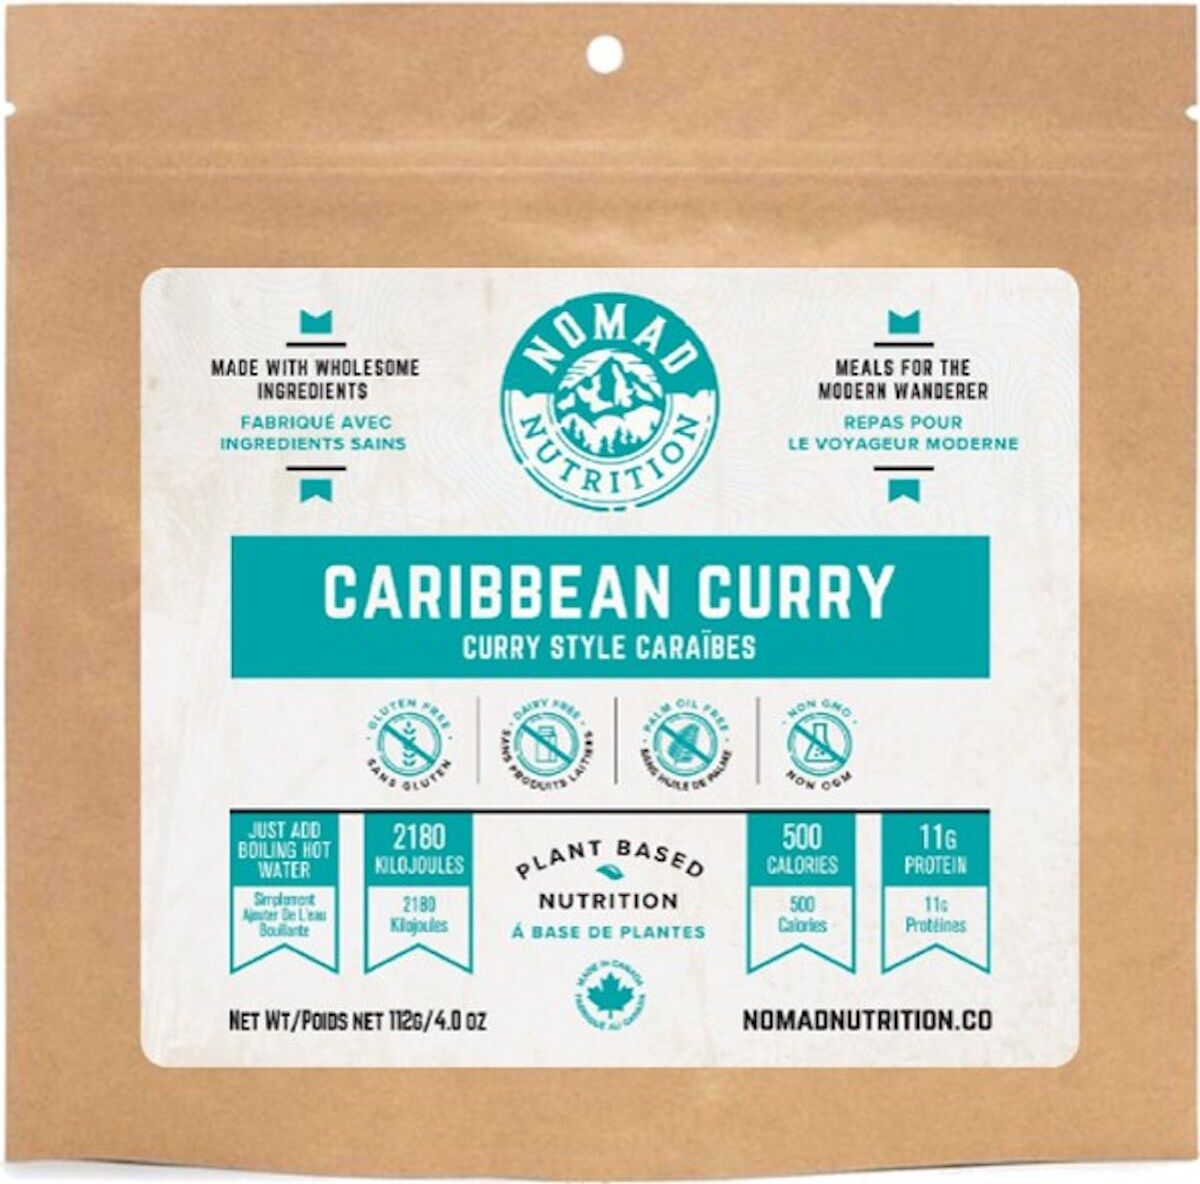 Brown paper packaging for Nomad Nutrition Caribbean Curry with blue and white label